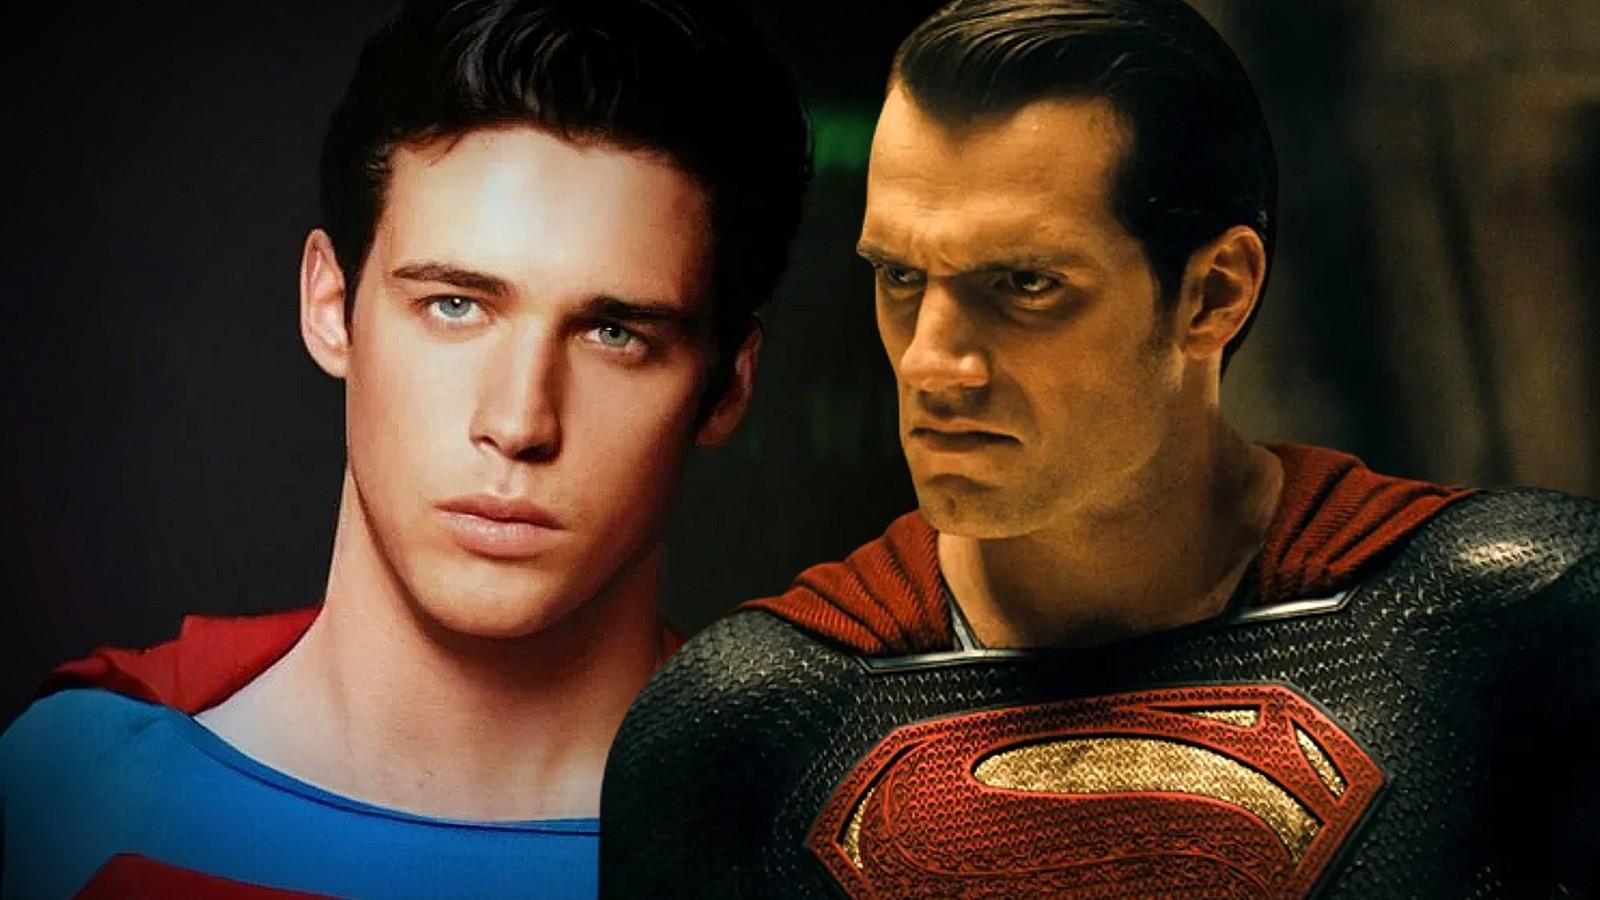 Marvel fans want Henry Cavill to play “MCU's Superman” - Dexerto